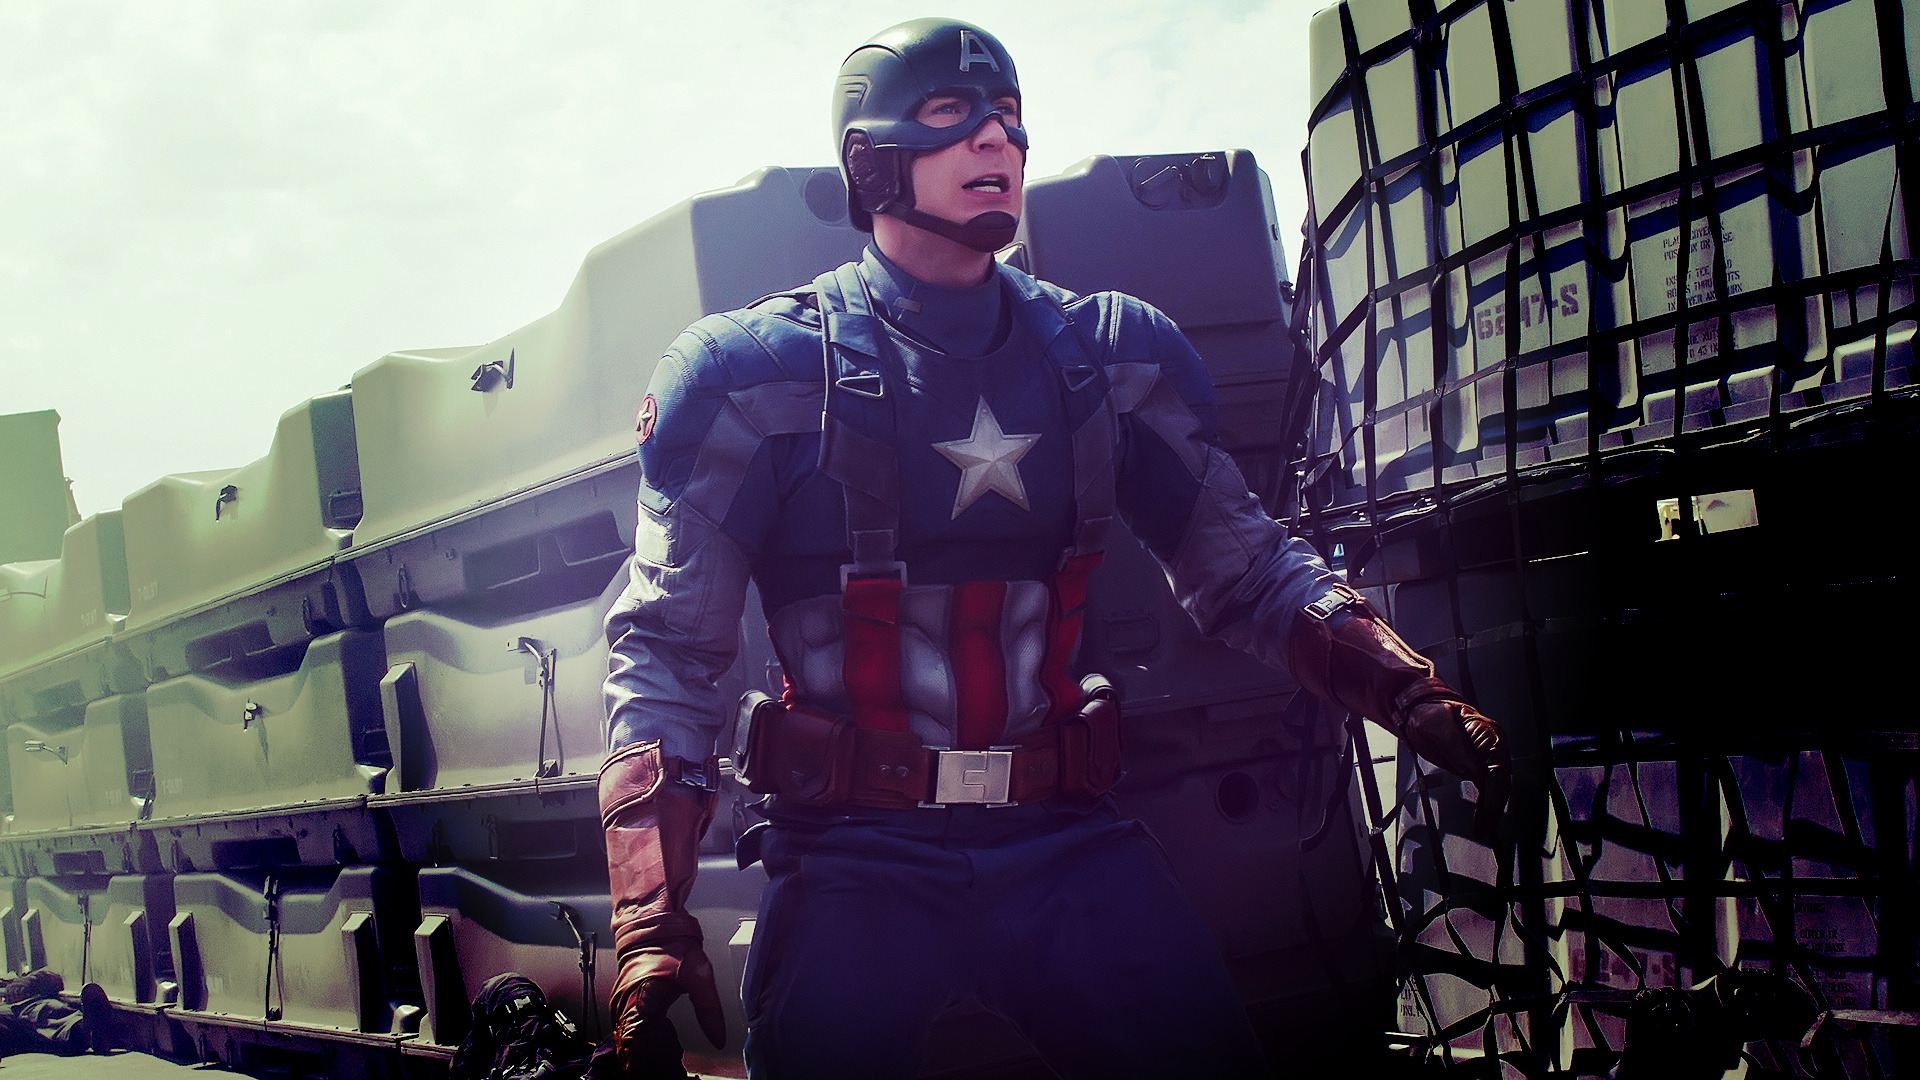 Captain America in Action for 1920 x 1080 HDTV 1080p resolution